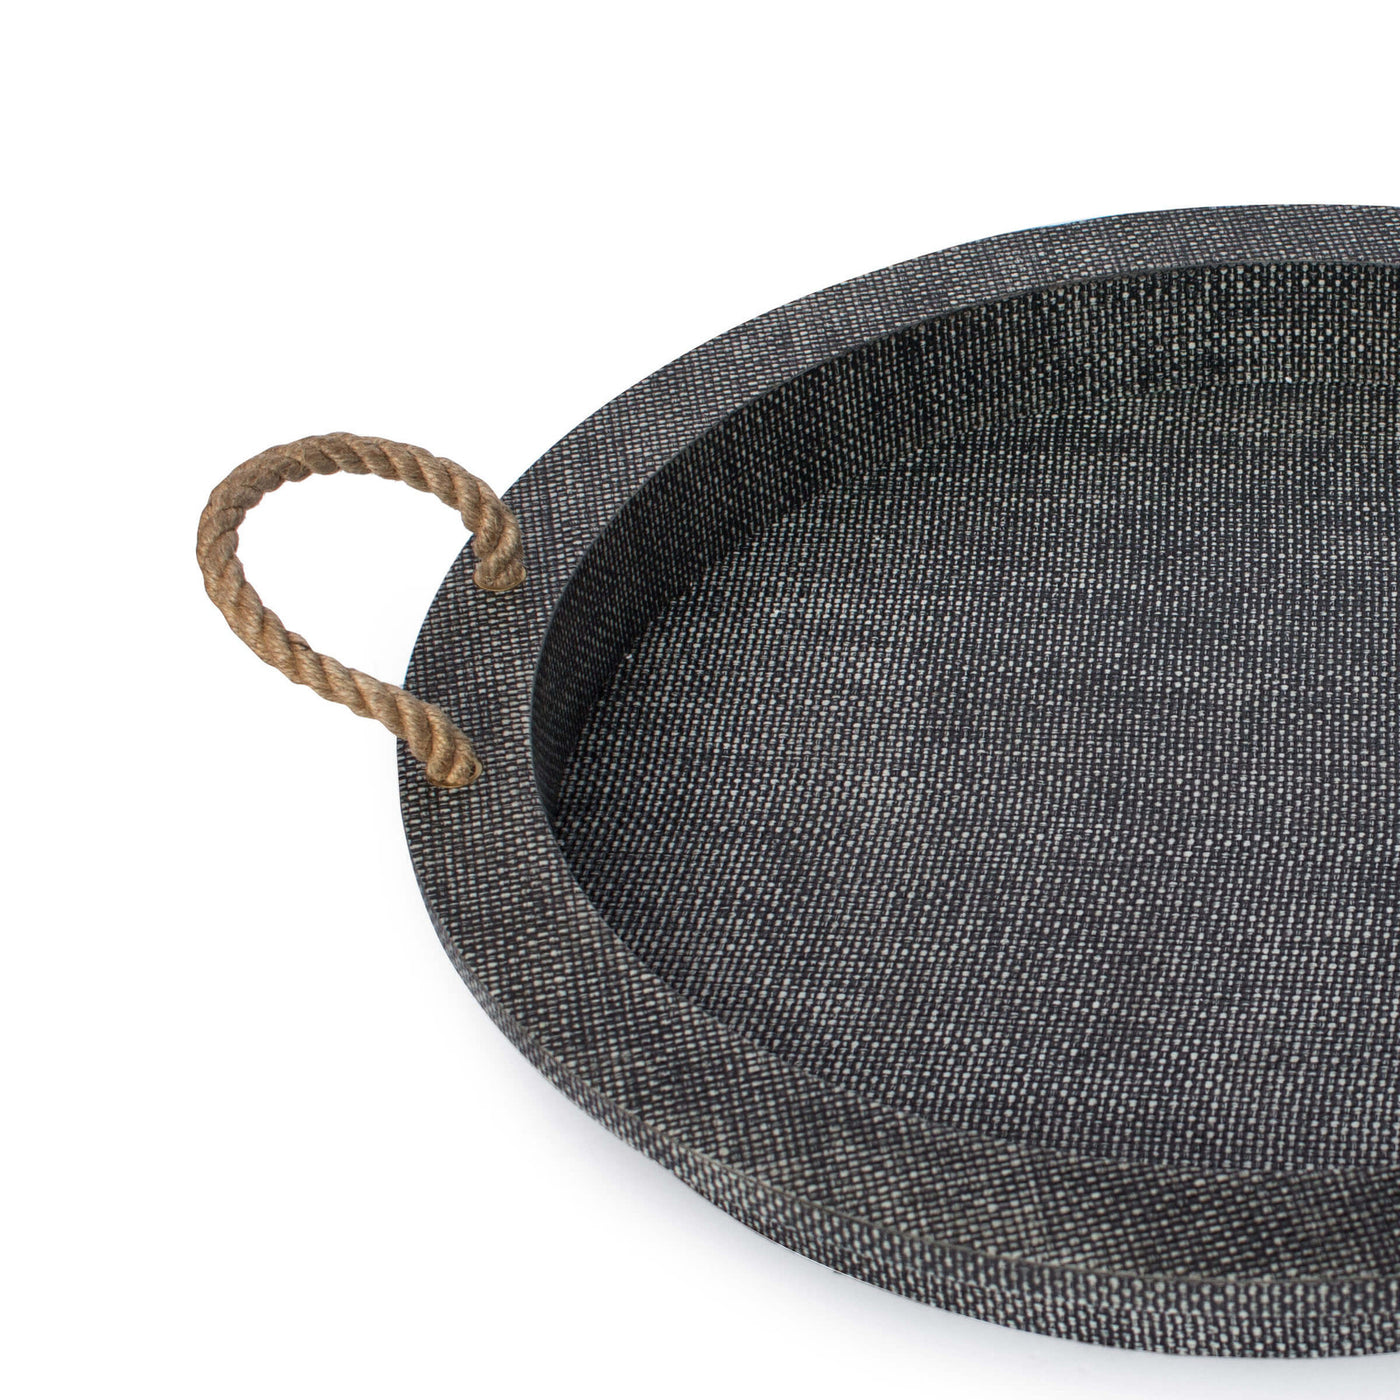 TRAY RATTAN WITH ROPE HANDLES ROUND (Available in 2 Colors)